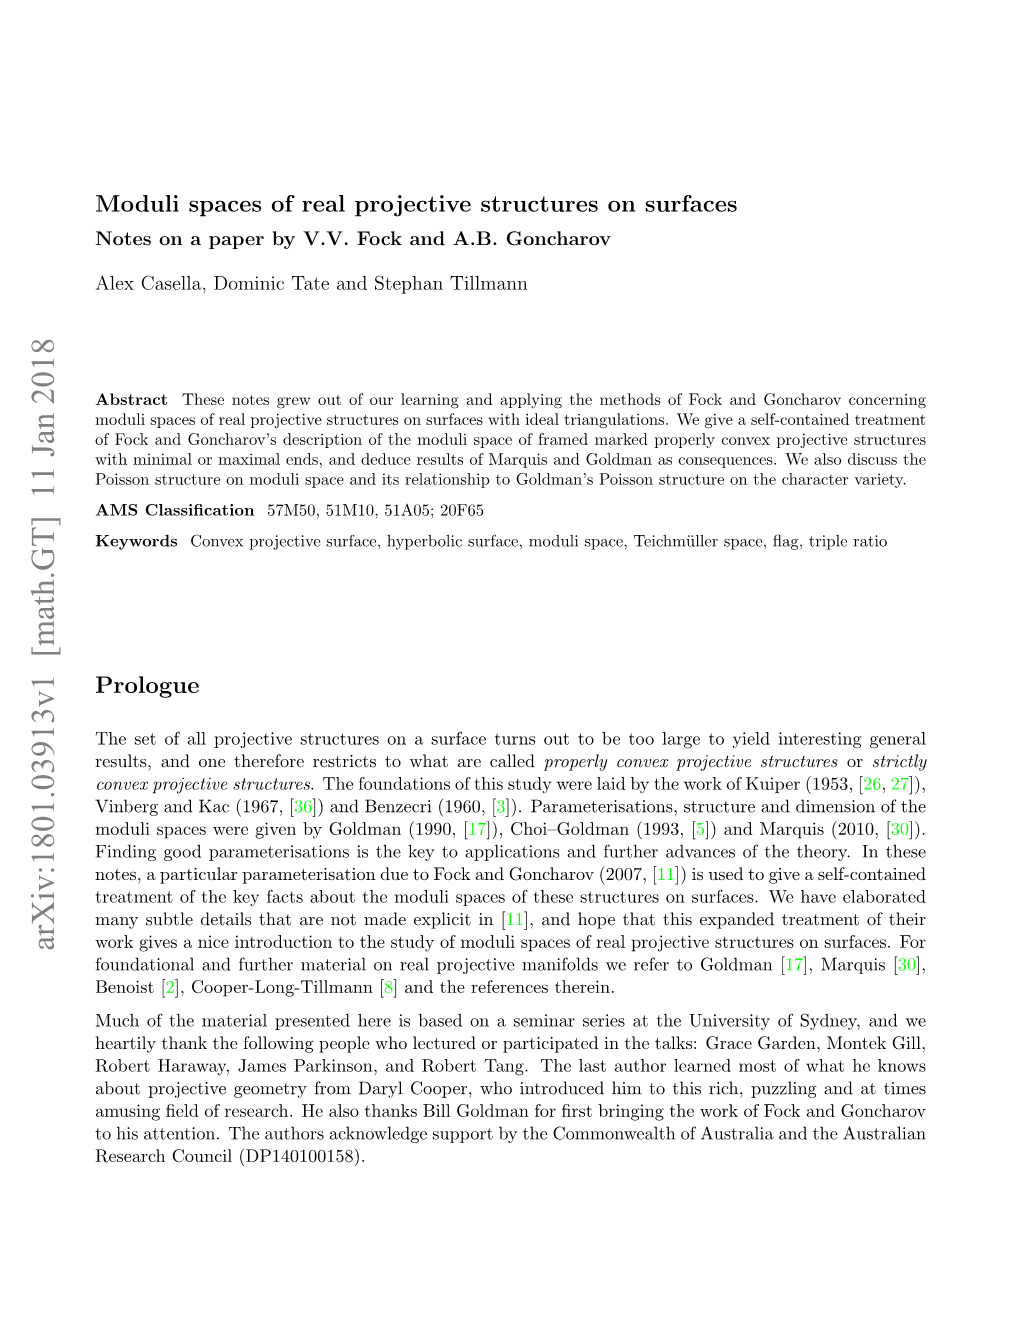 Arxiv:1801.03913V1 [Math.GT] 11 Jan 2018 Work Gives a Nice Introduction to the Study of Moduli Spaces of Real Projective Structures on Surfaces